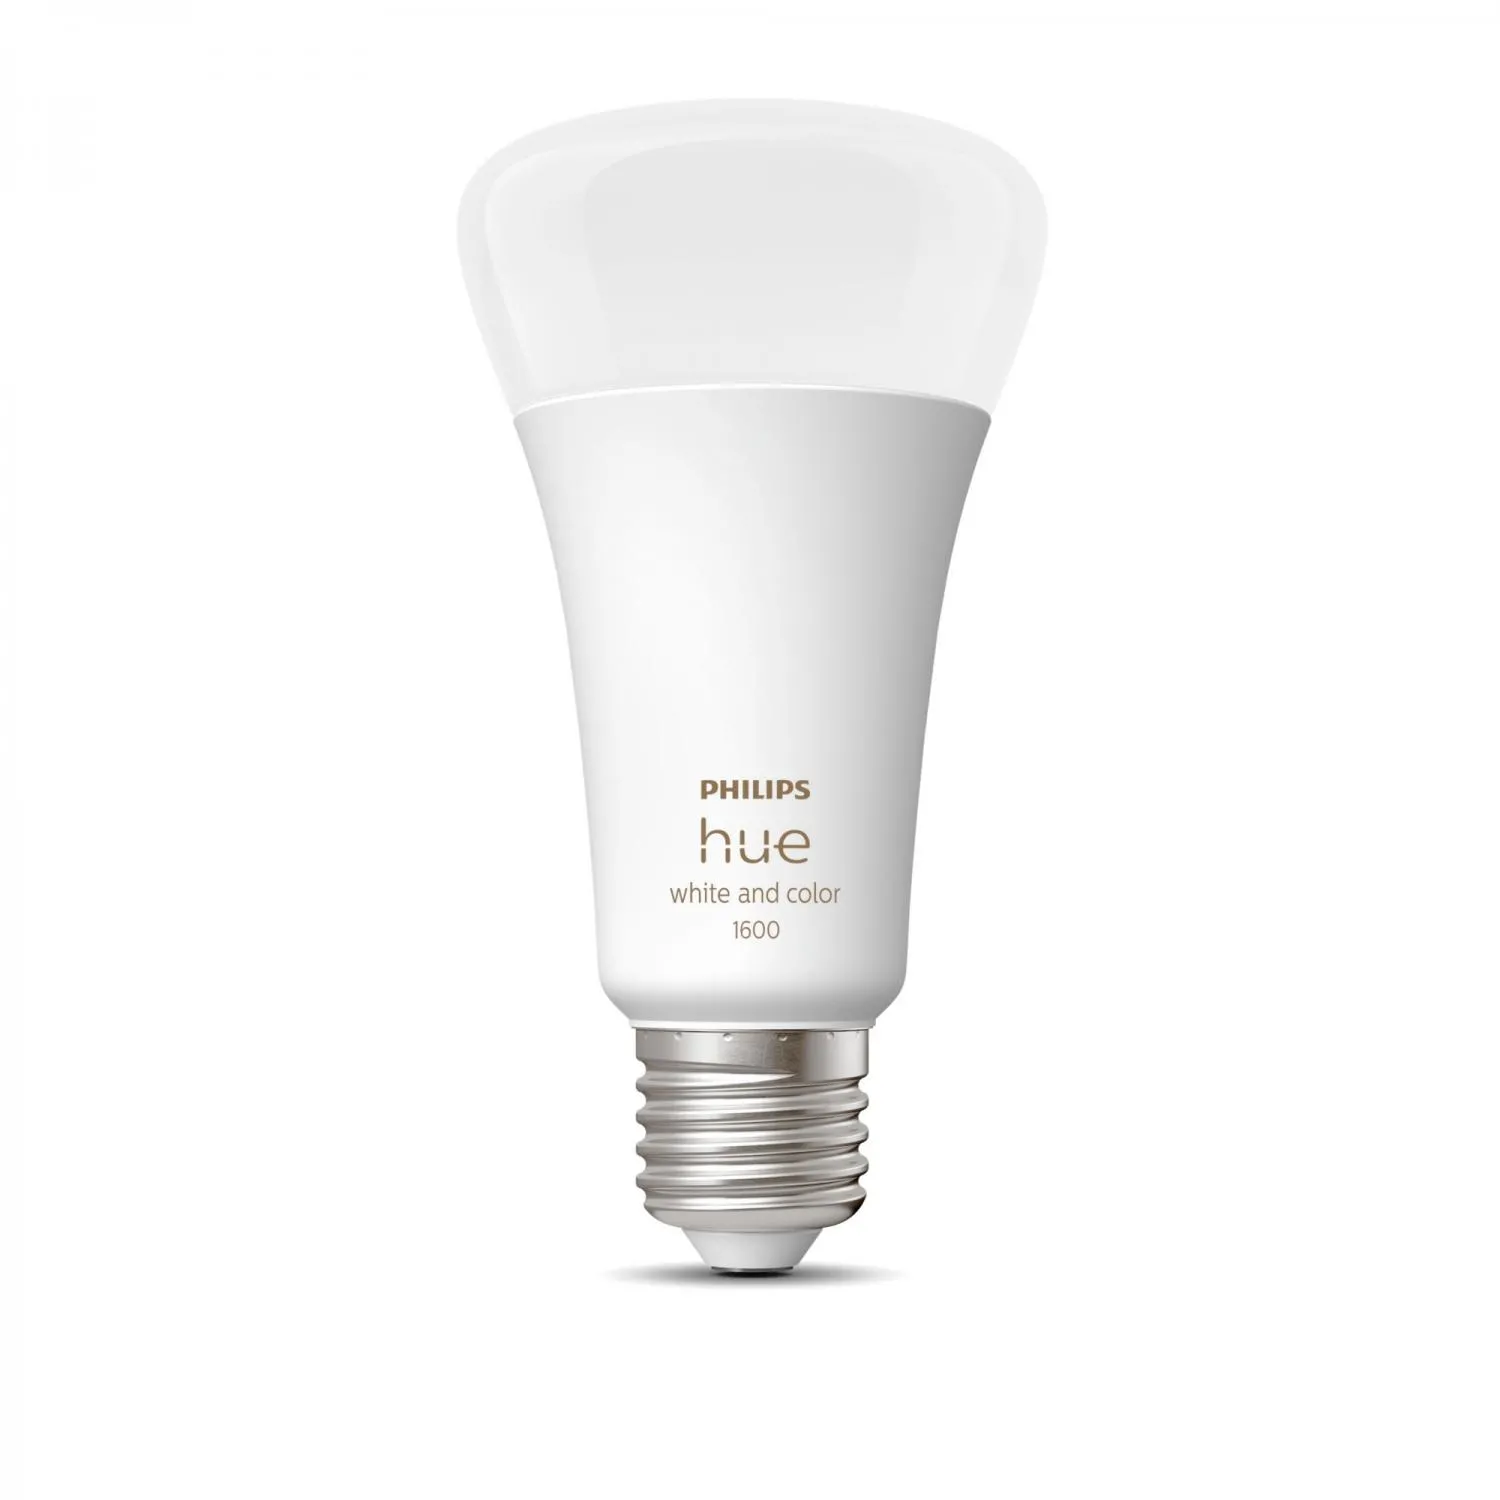 https://www.prezzoforte.it/images/webp/Philips_HUE_WHITE_AND_COLOR_AMBIANCE_LAMPAD_341121_1.webp